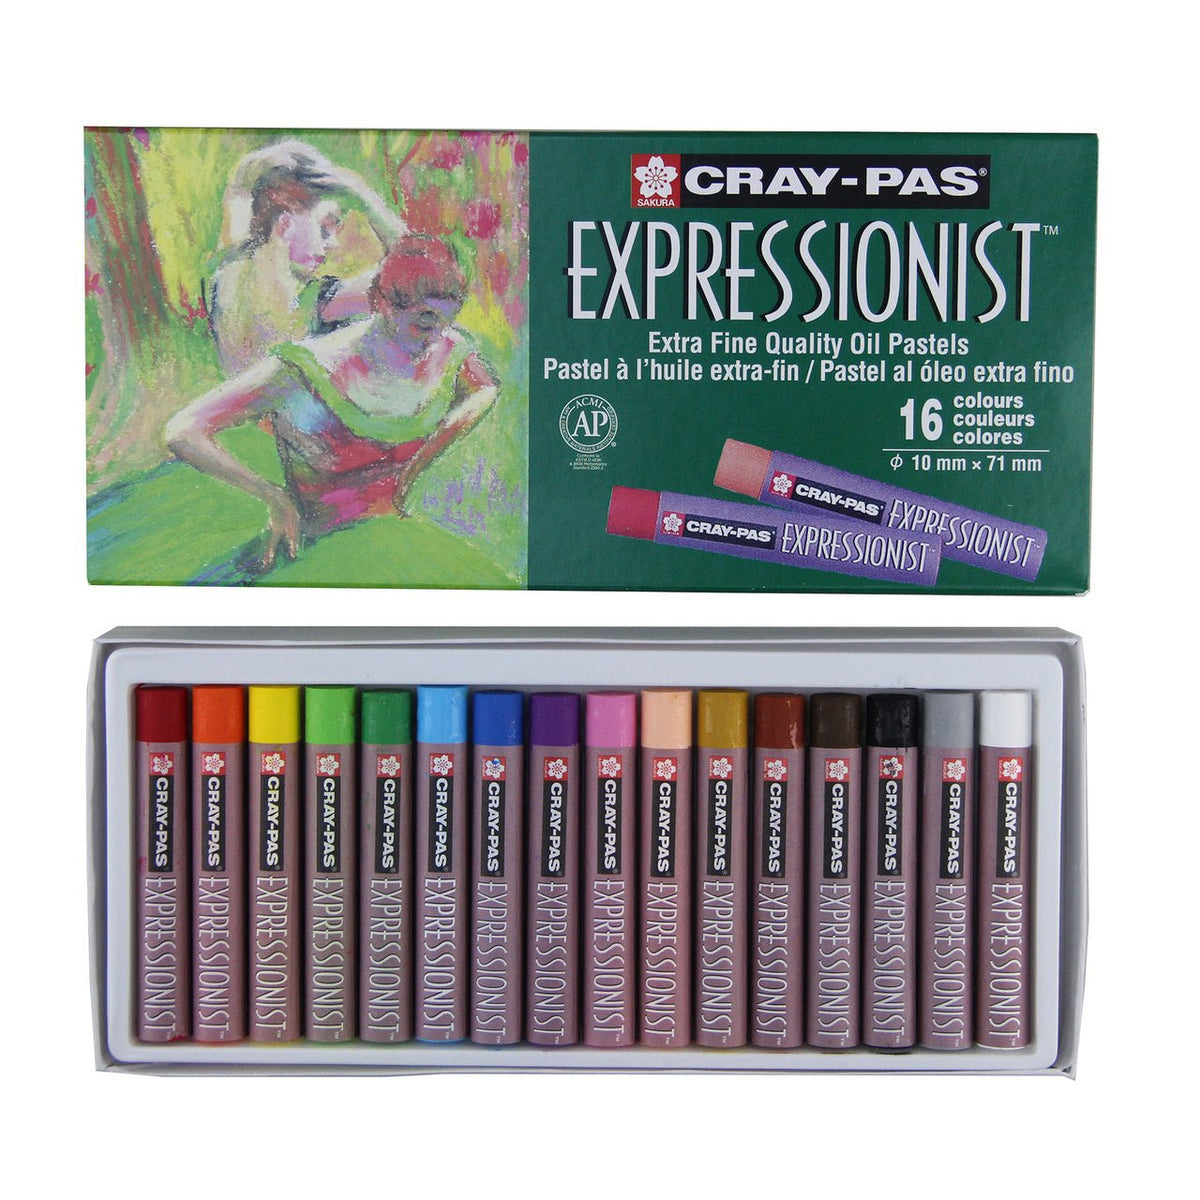 Cray-Pas Expressionist Oil Pastels set of 16 - merriartist.com